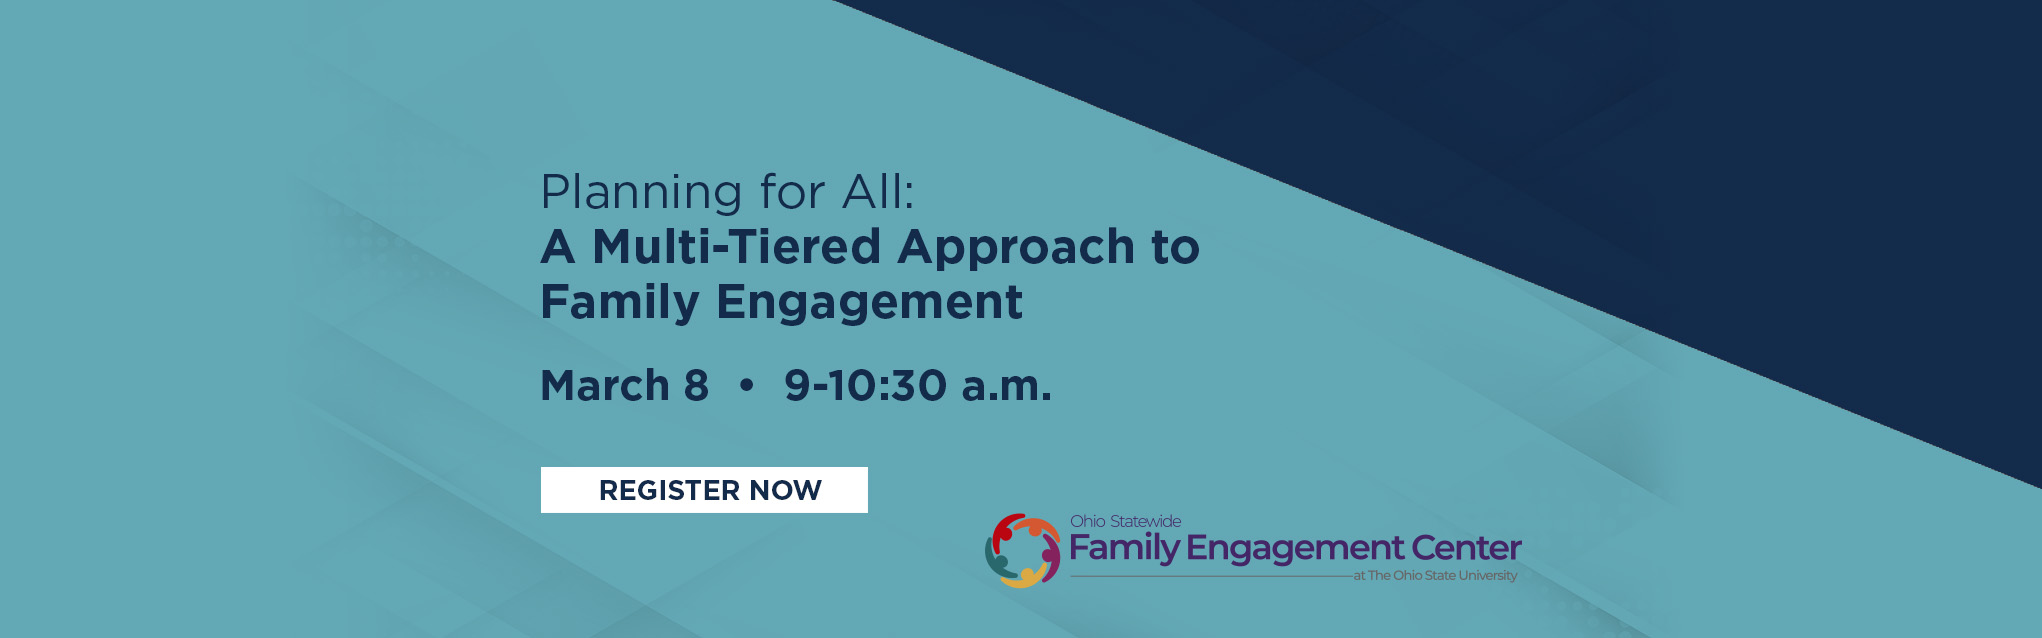 March 8, 9-10:30 - Planning for All: A Multi-Tiered Approach to Family Engagement